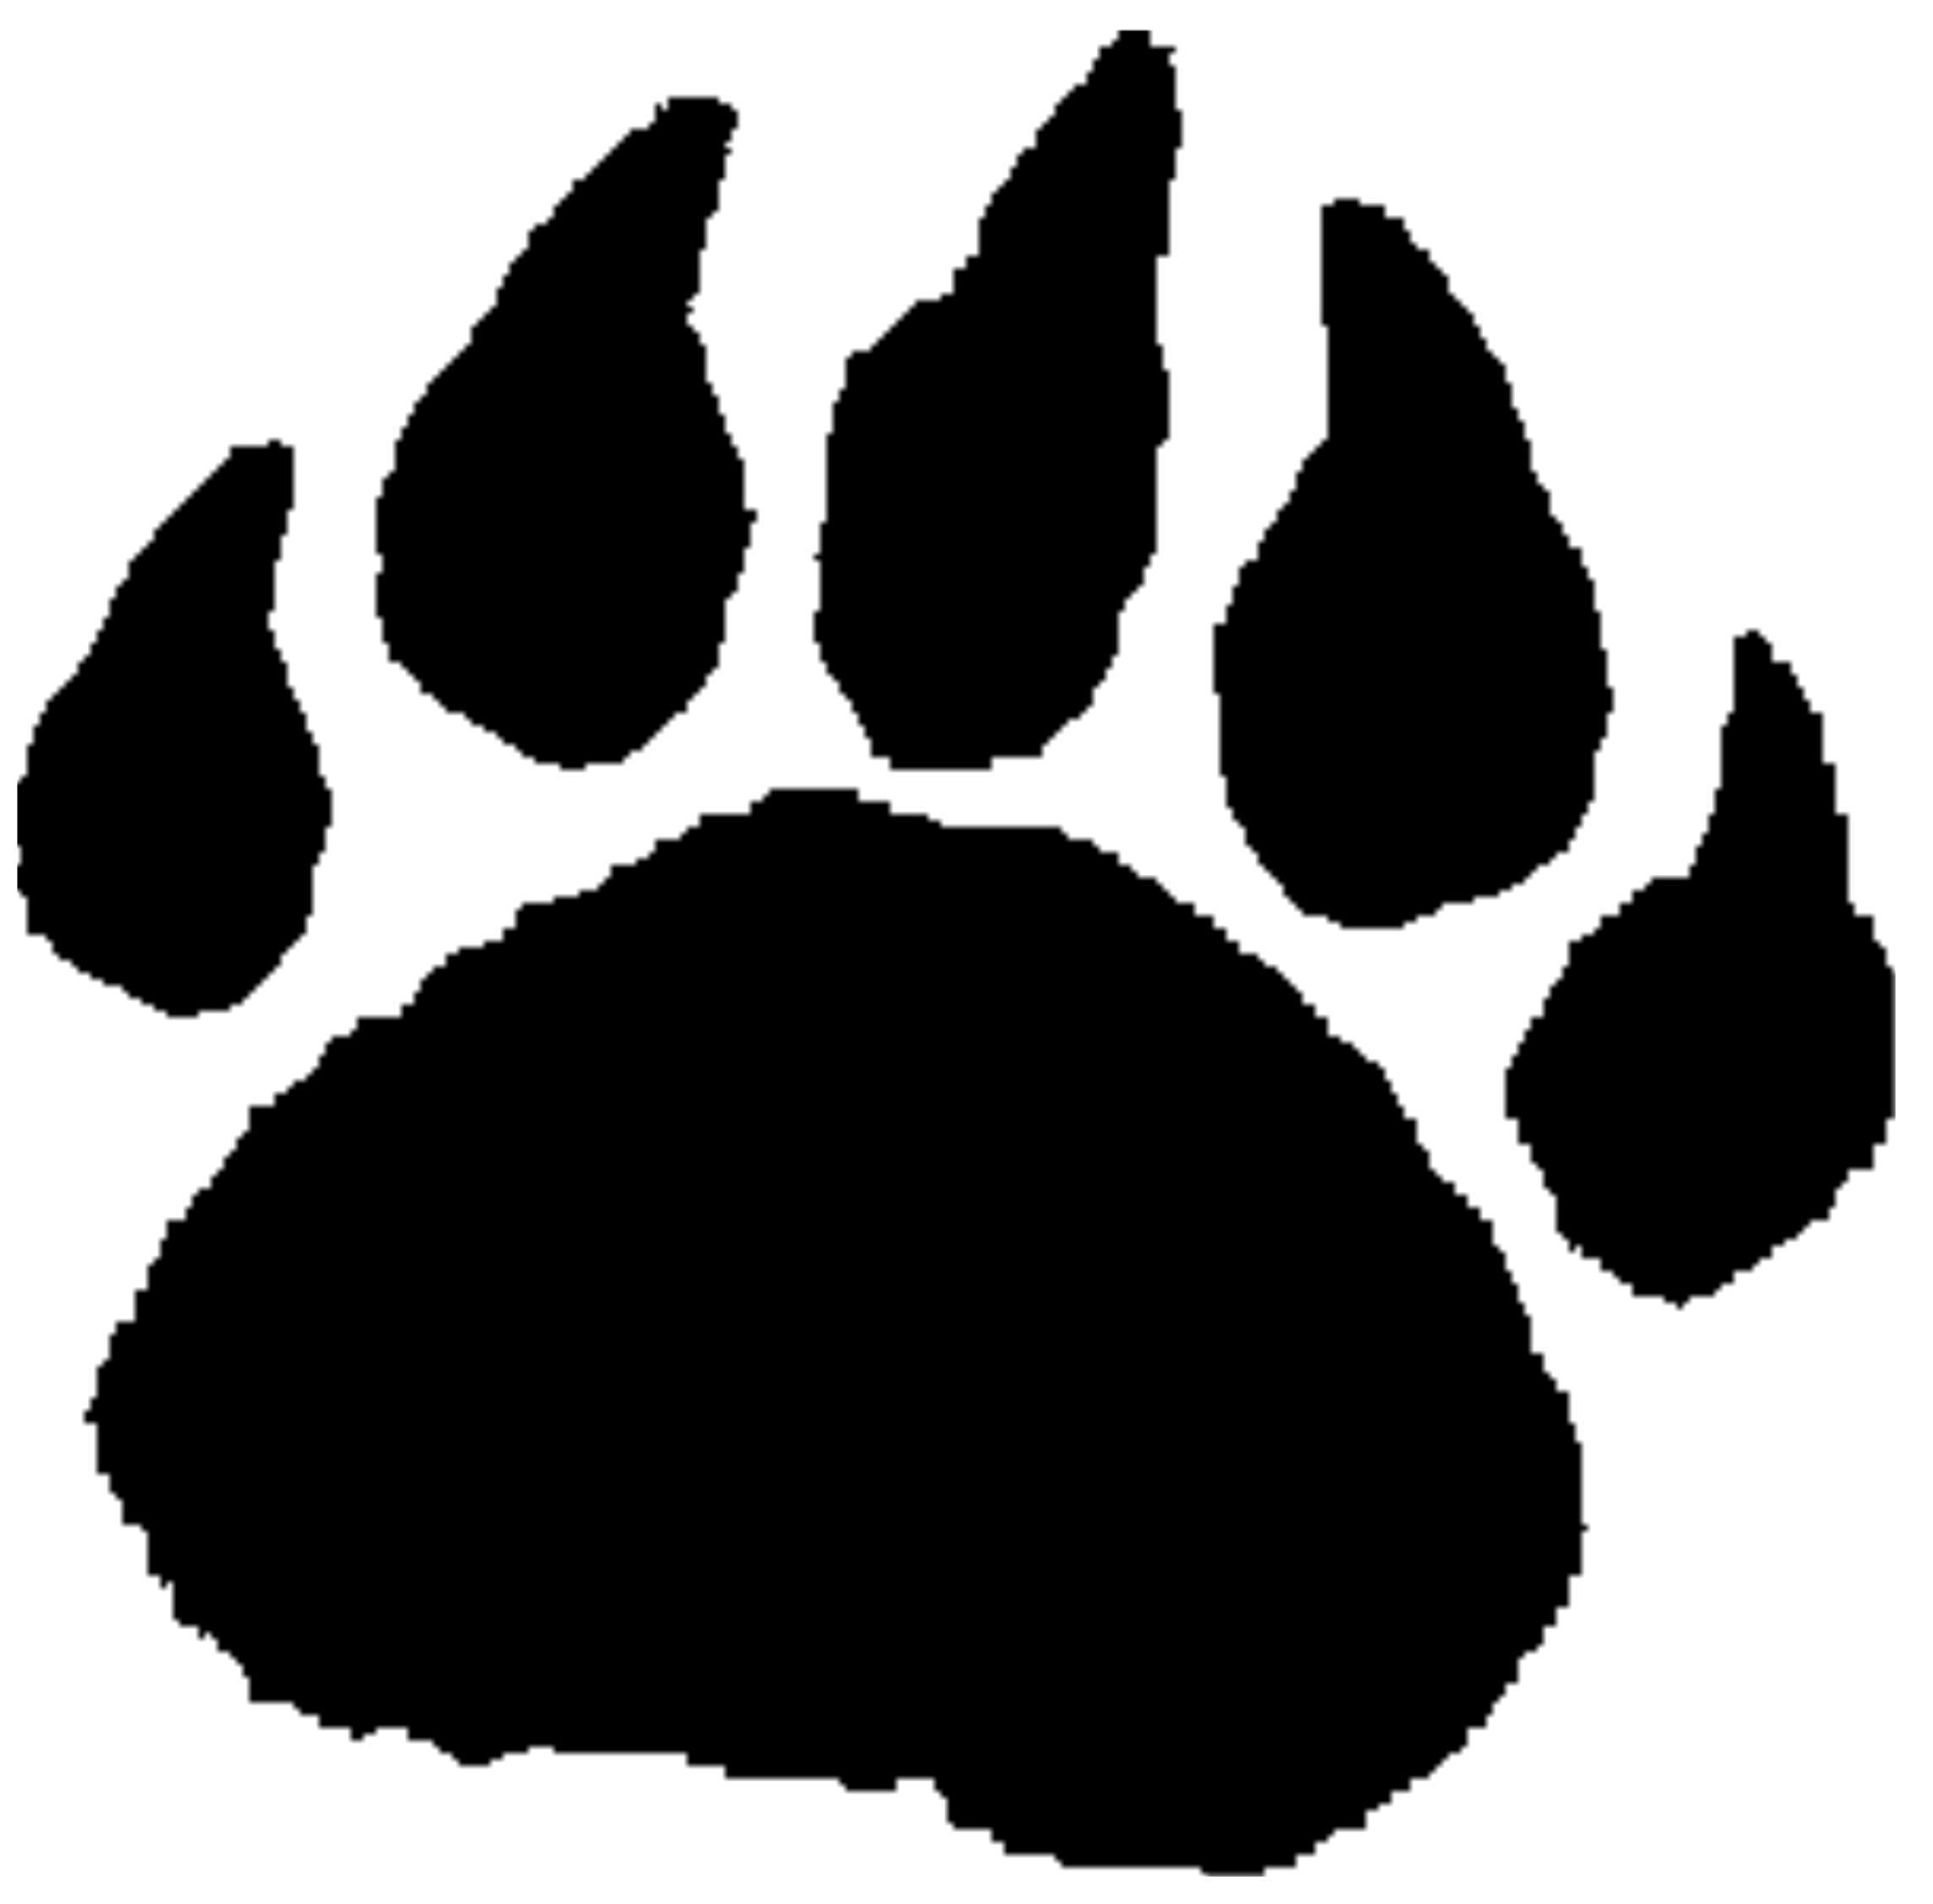 Bear Cub Paw Images On Clipart - ClipArt Best